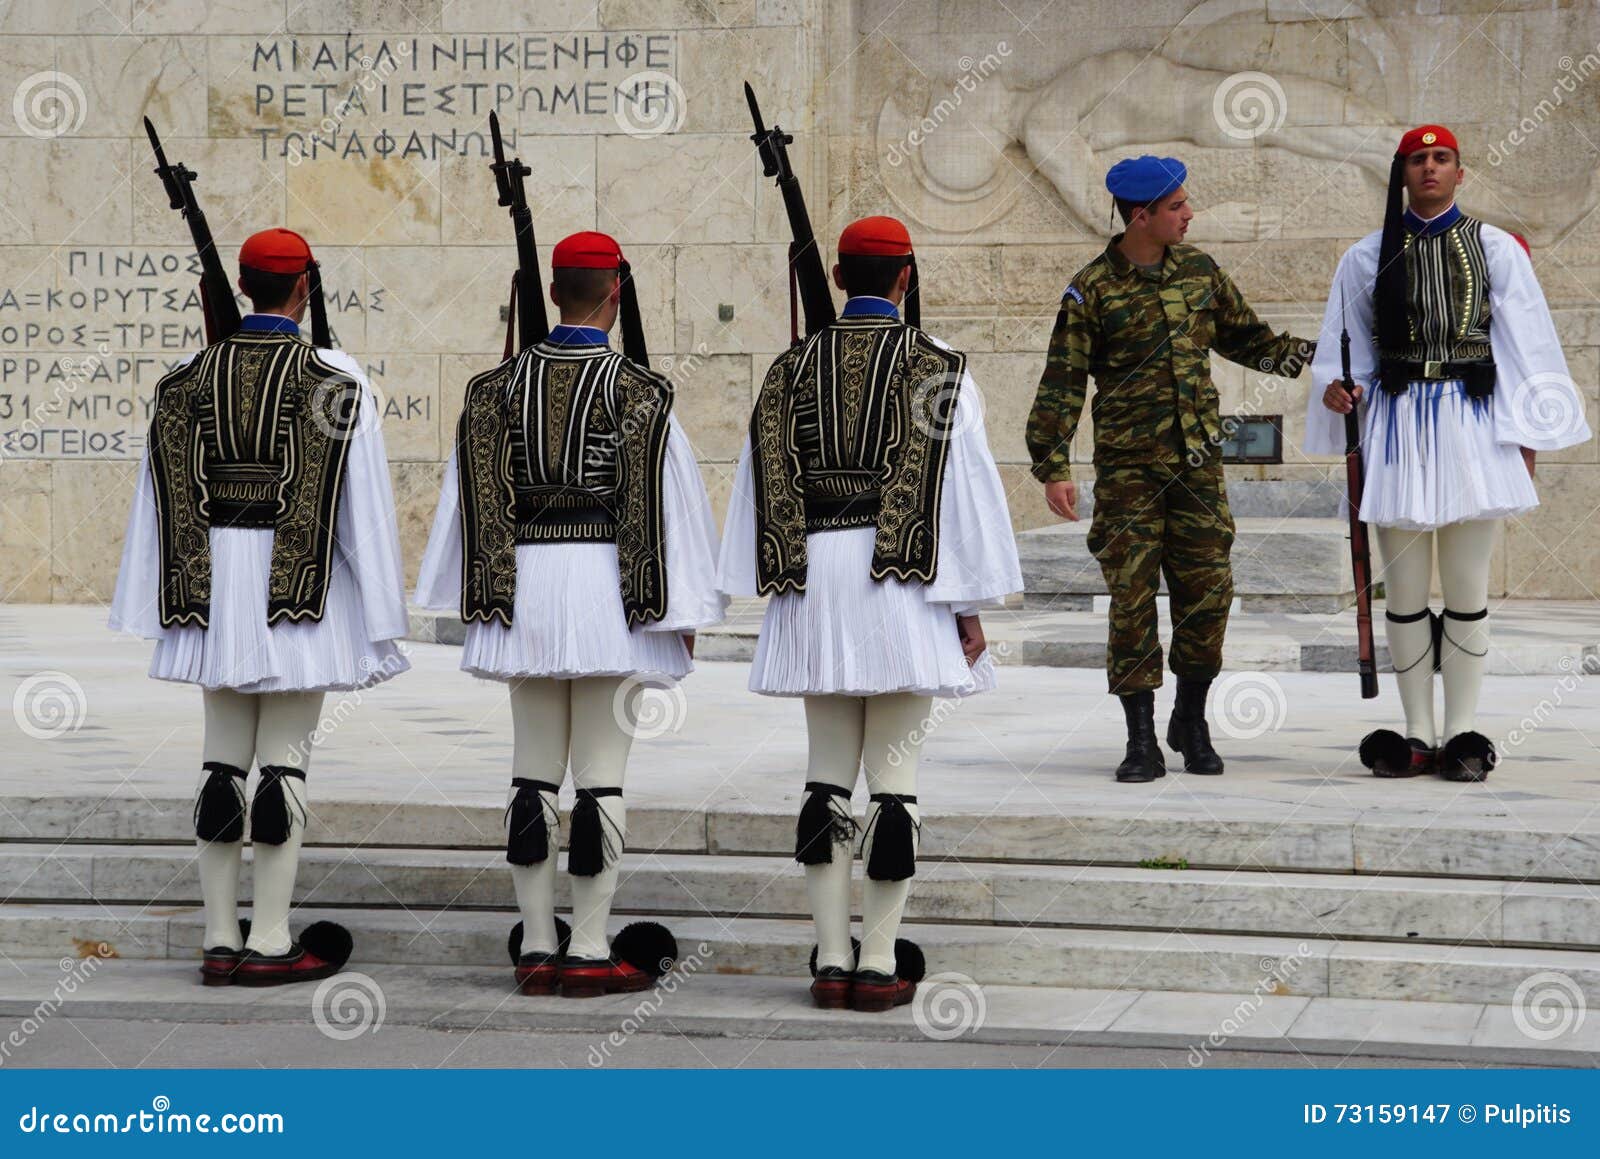 swim Quadrant touch Greek Soldiers at Greek Parliament in Athens,Greece. Editorial Photography  - Image of marching, honor: 73159147